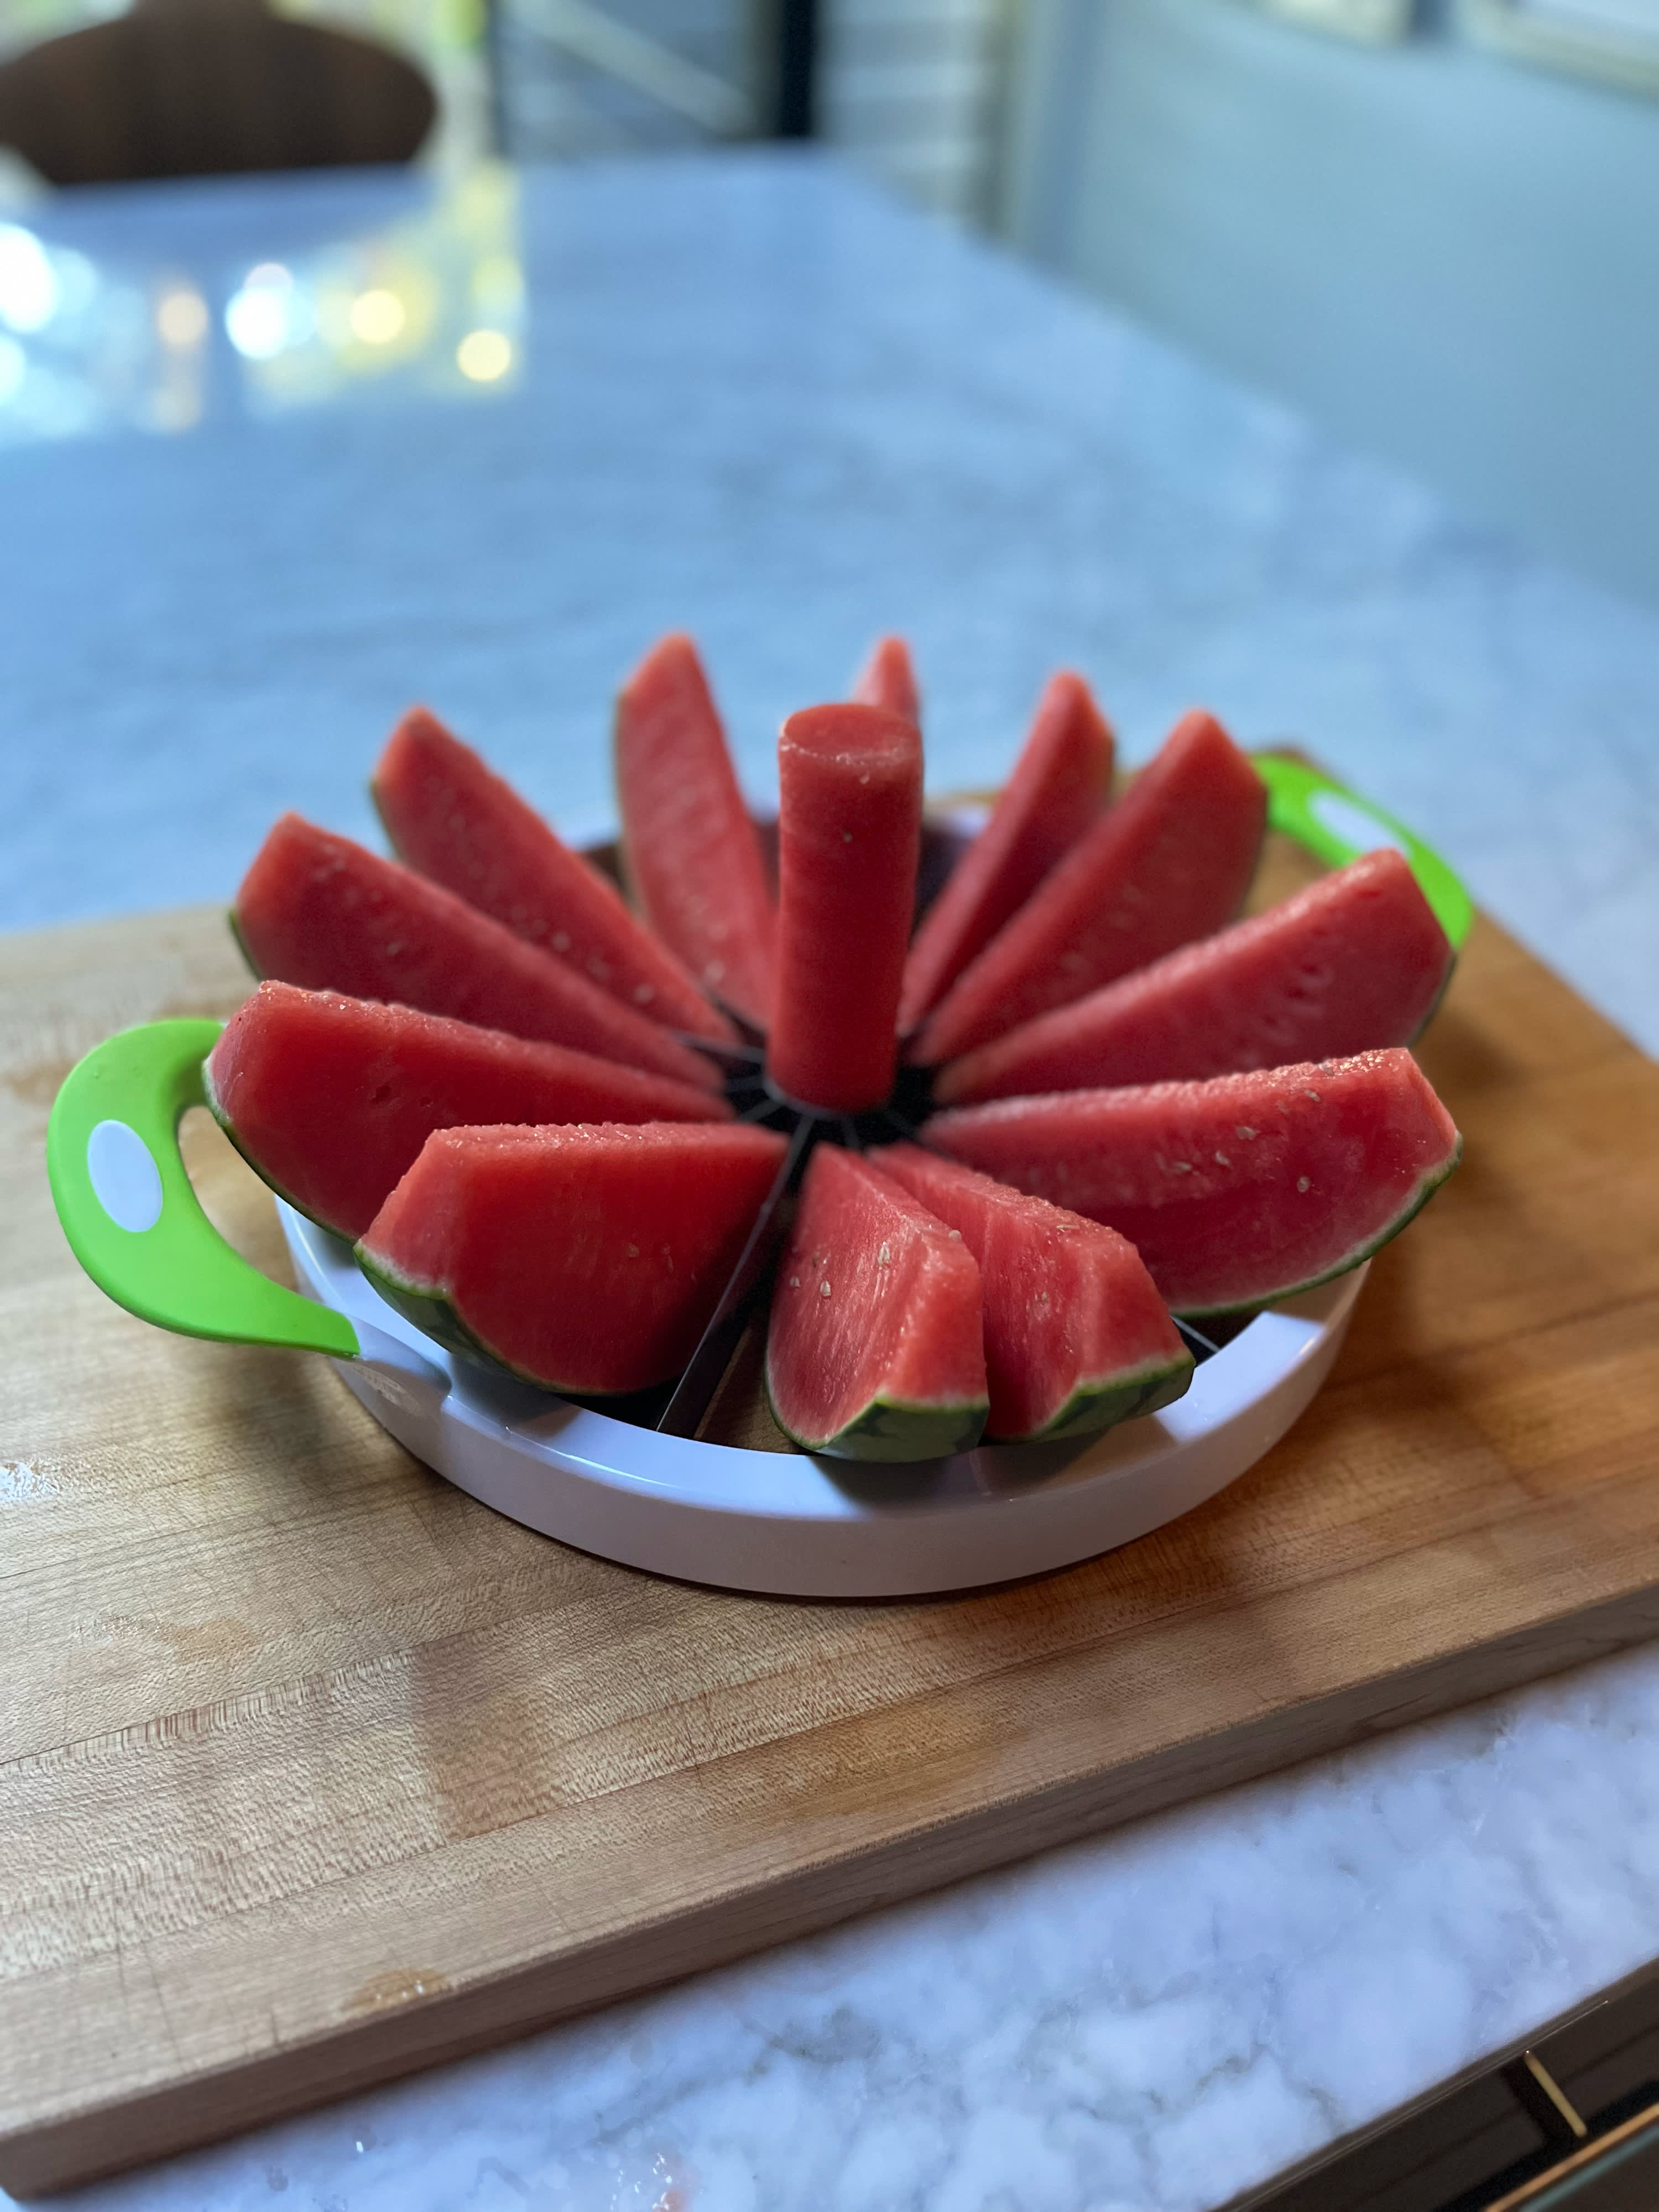 Generic Watermelon Cutter Slicer Comfort Salad Melon Cutter With